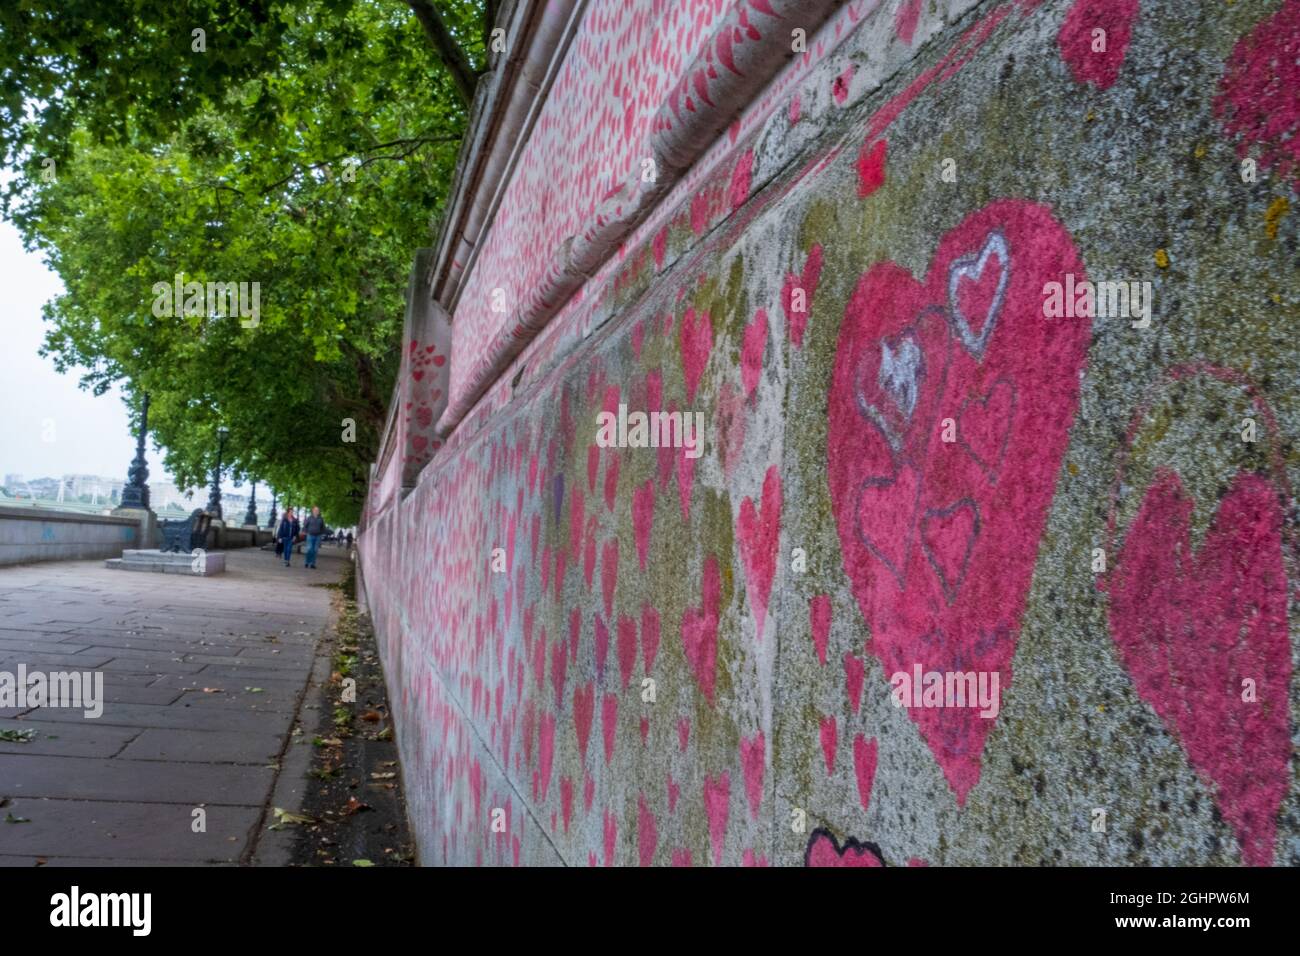 London, United Kingdom - July 30, 2021: The National Covid Memorial Wall on Southbank, covered in thousands of hand drawn hearts, in memory of all  li Stock Photo